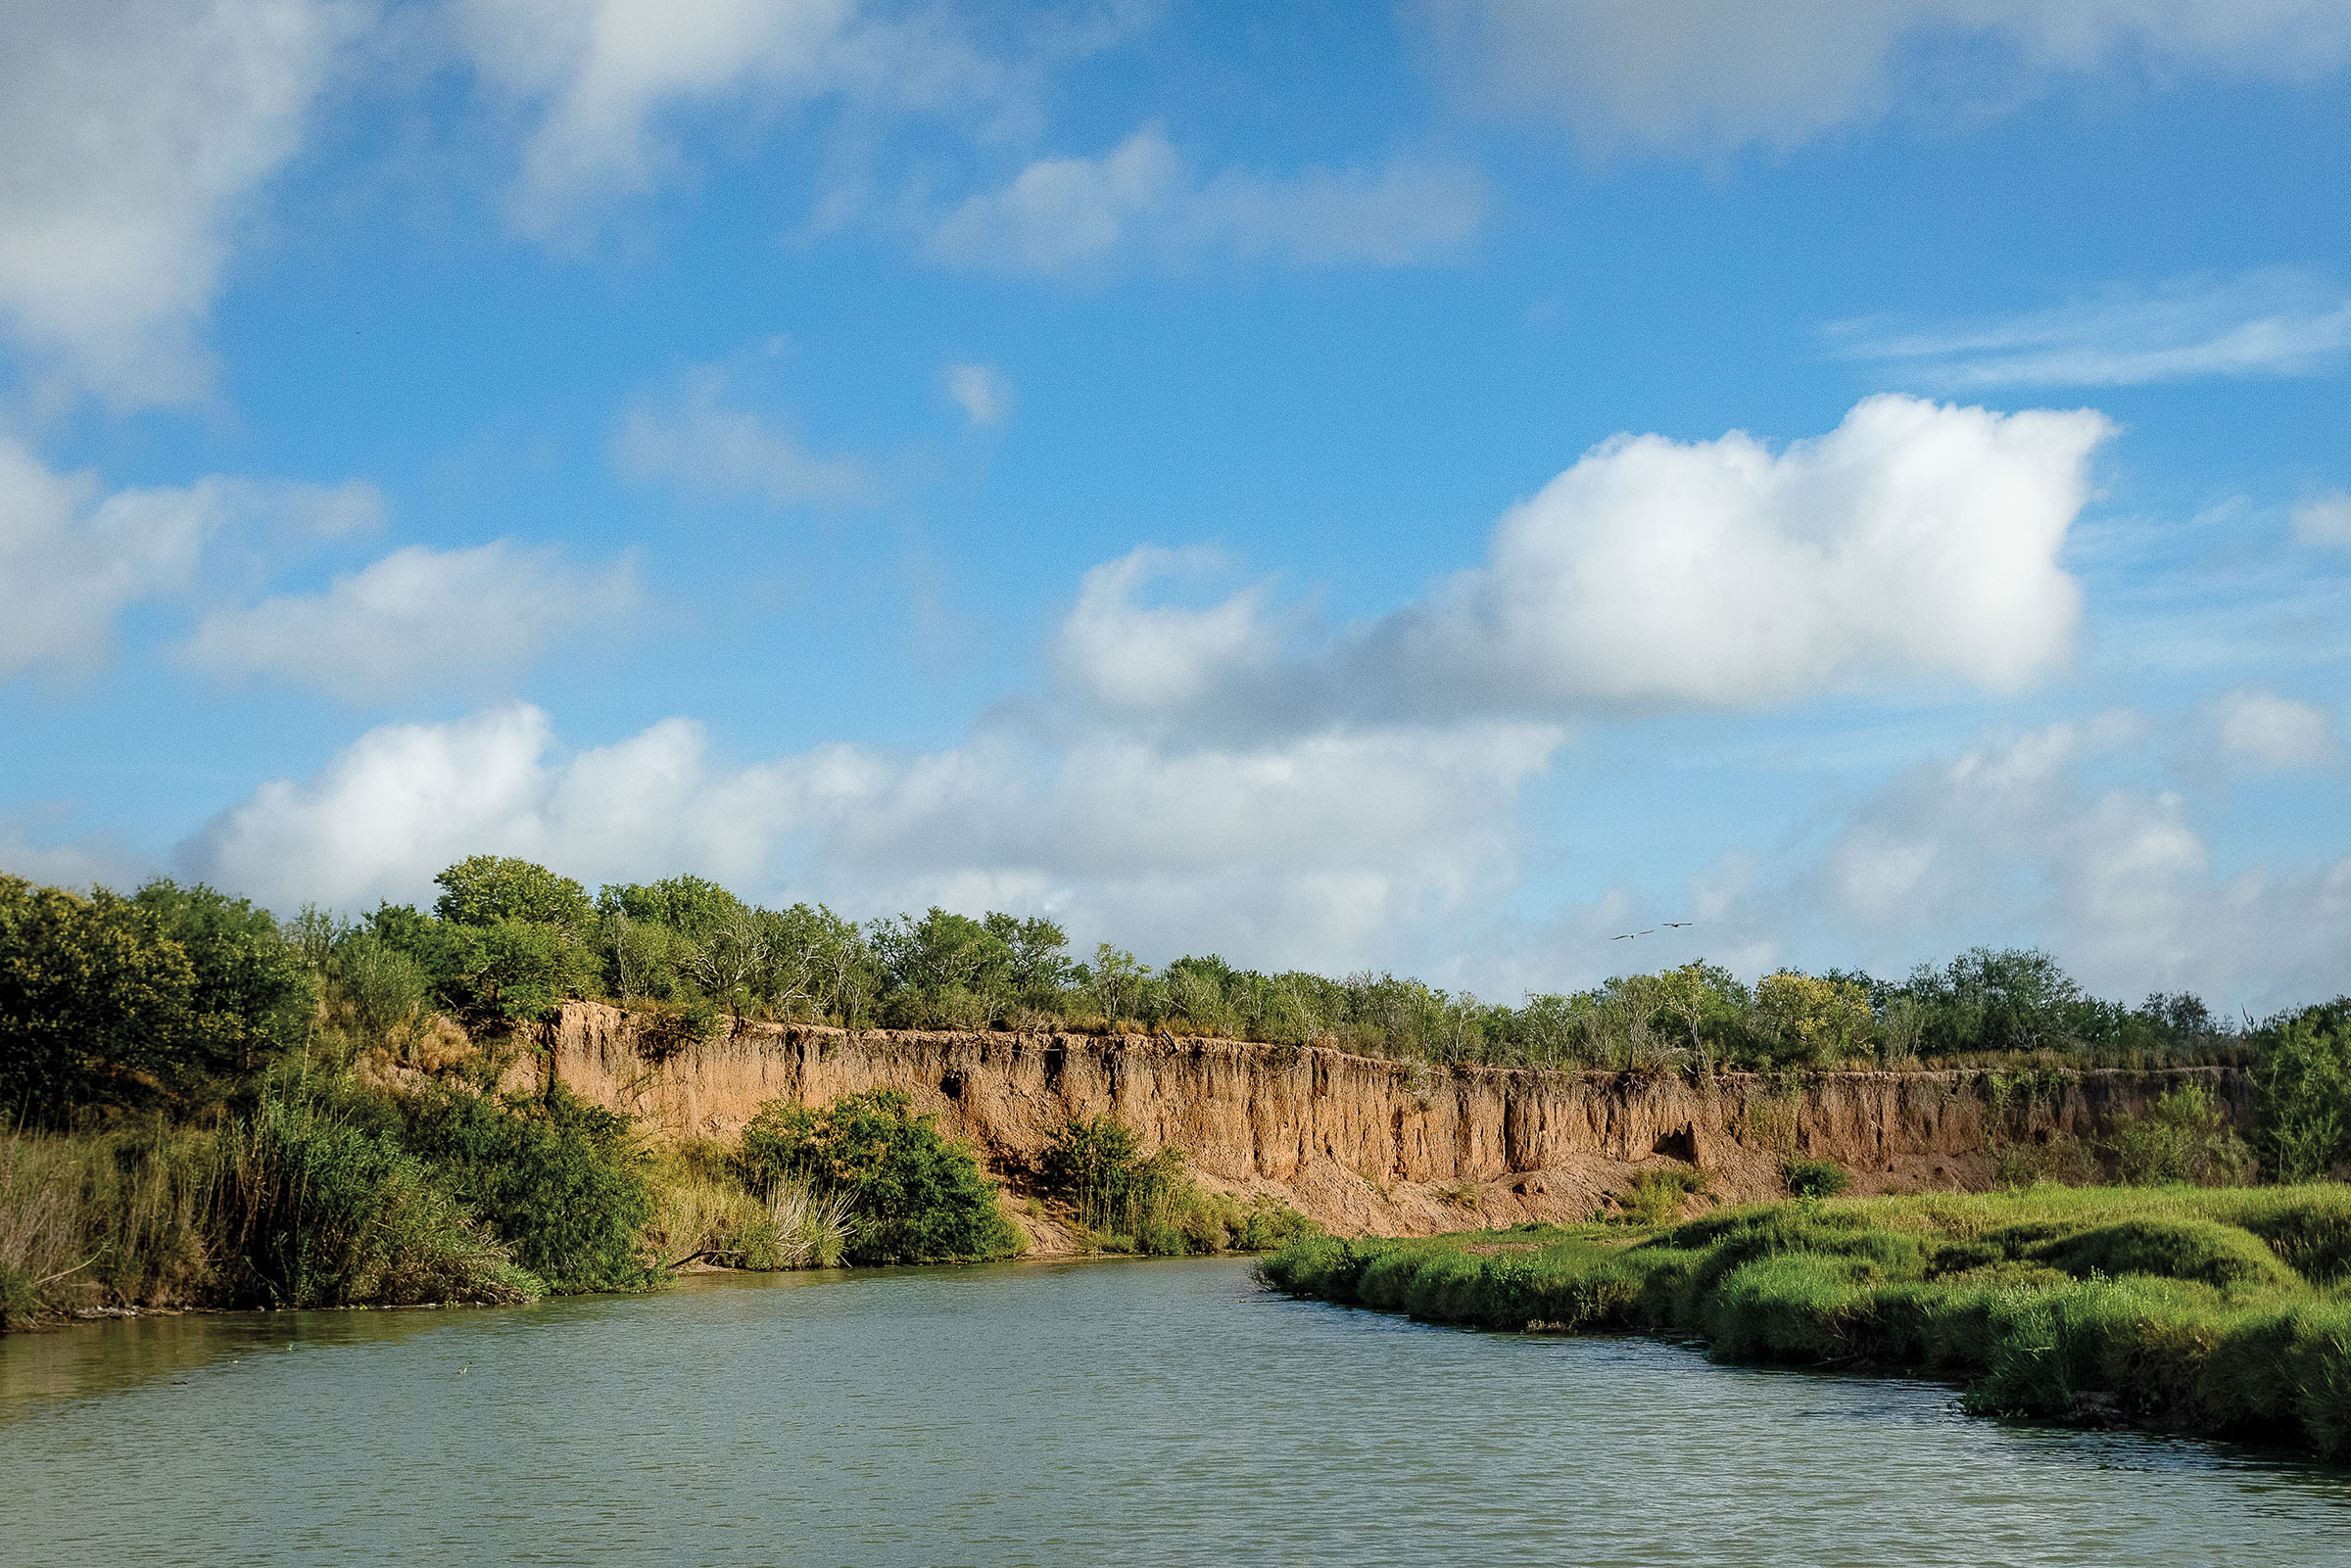 A rock outcropping with green trees above a wide blue river under a clear blue-sky day